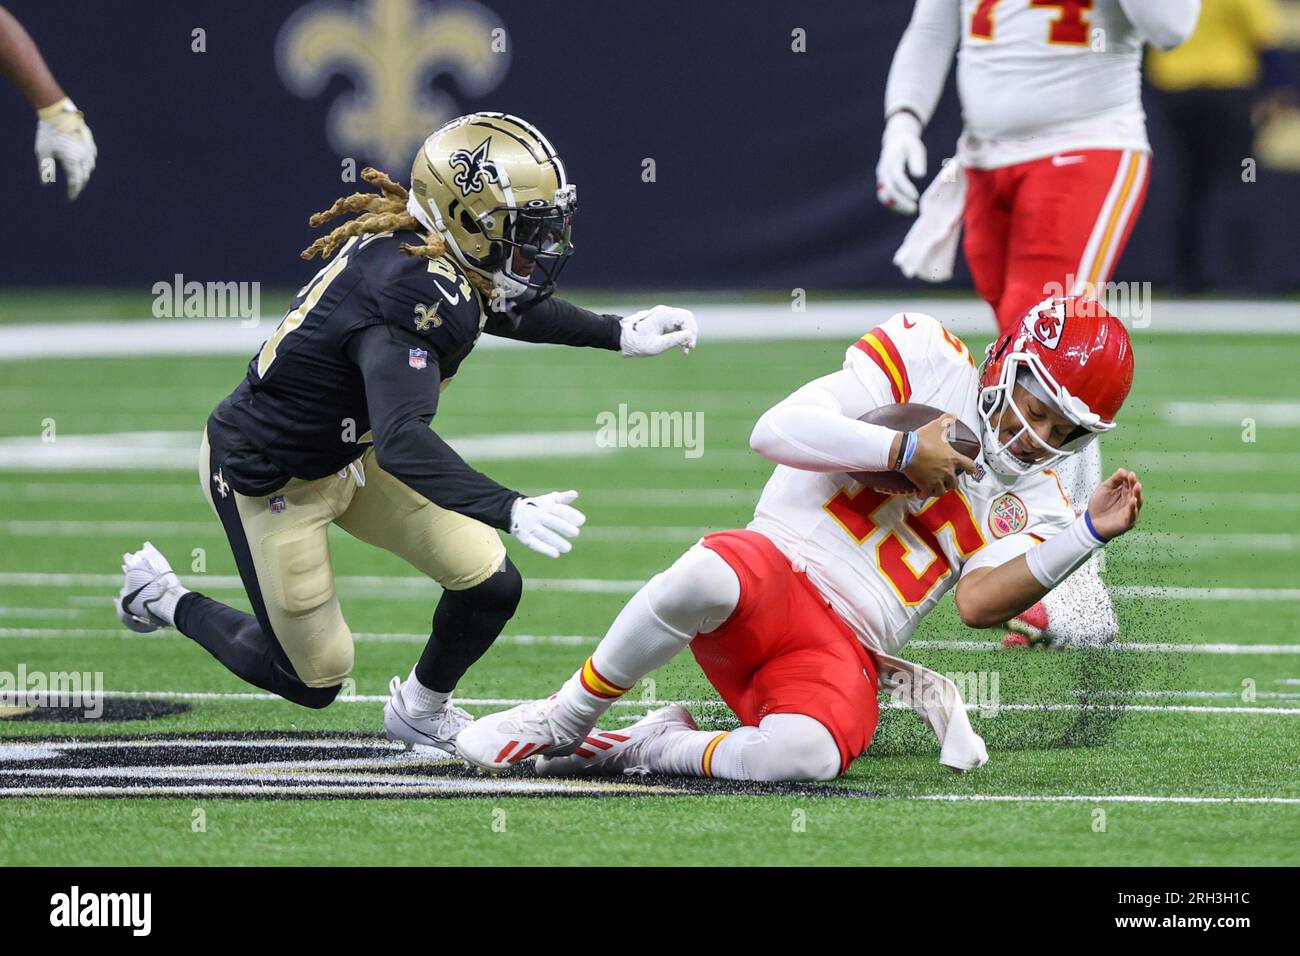 New Orleans, USA. August 13, 2023: Kansas City quarterback Patrick Mahomes (15) slides down in front of Saints defender Bradley Roby (21) during NFL pre-season game action between the New Orleans Saints and the Kansas City Chiefs at the Caesars Superdome in New Orleans, LA. Jonathan Mailhes/CSM Credit: Cal Sport Media/Alamy Live News Stock Photo